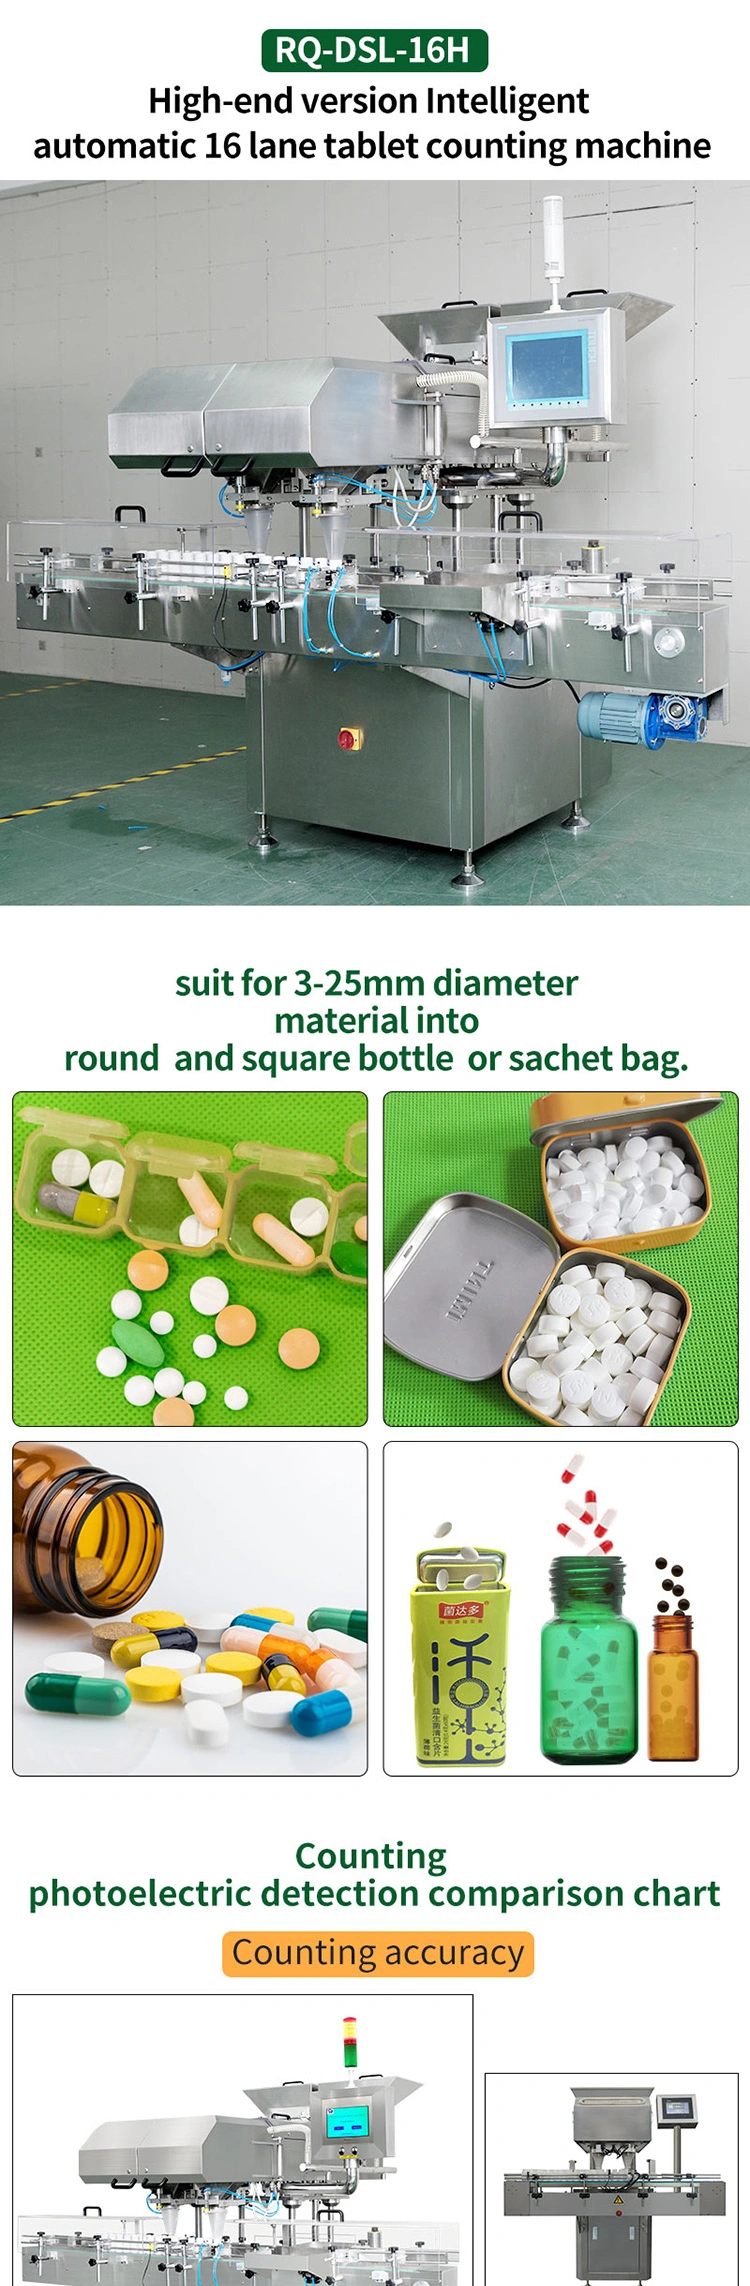 Automatic Pharmacy Tablet Counting Machine Rq-DSL-16h Bottle Capsule Pills Counting Machine